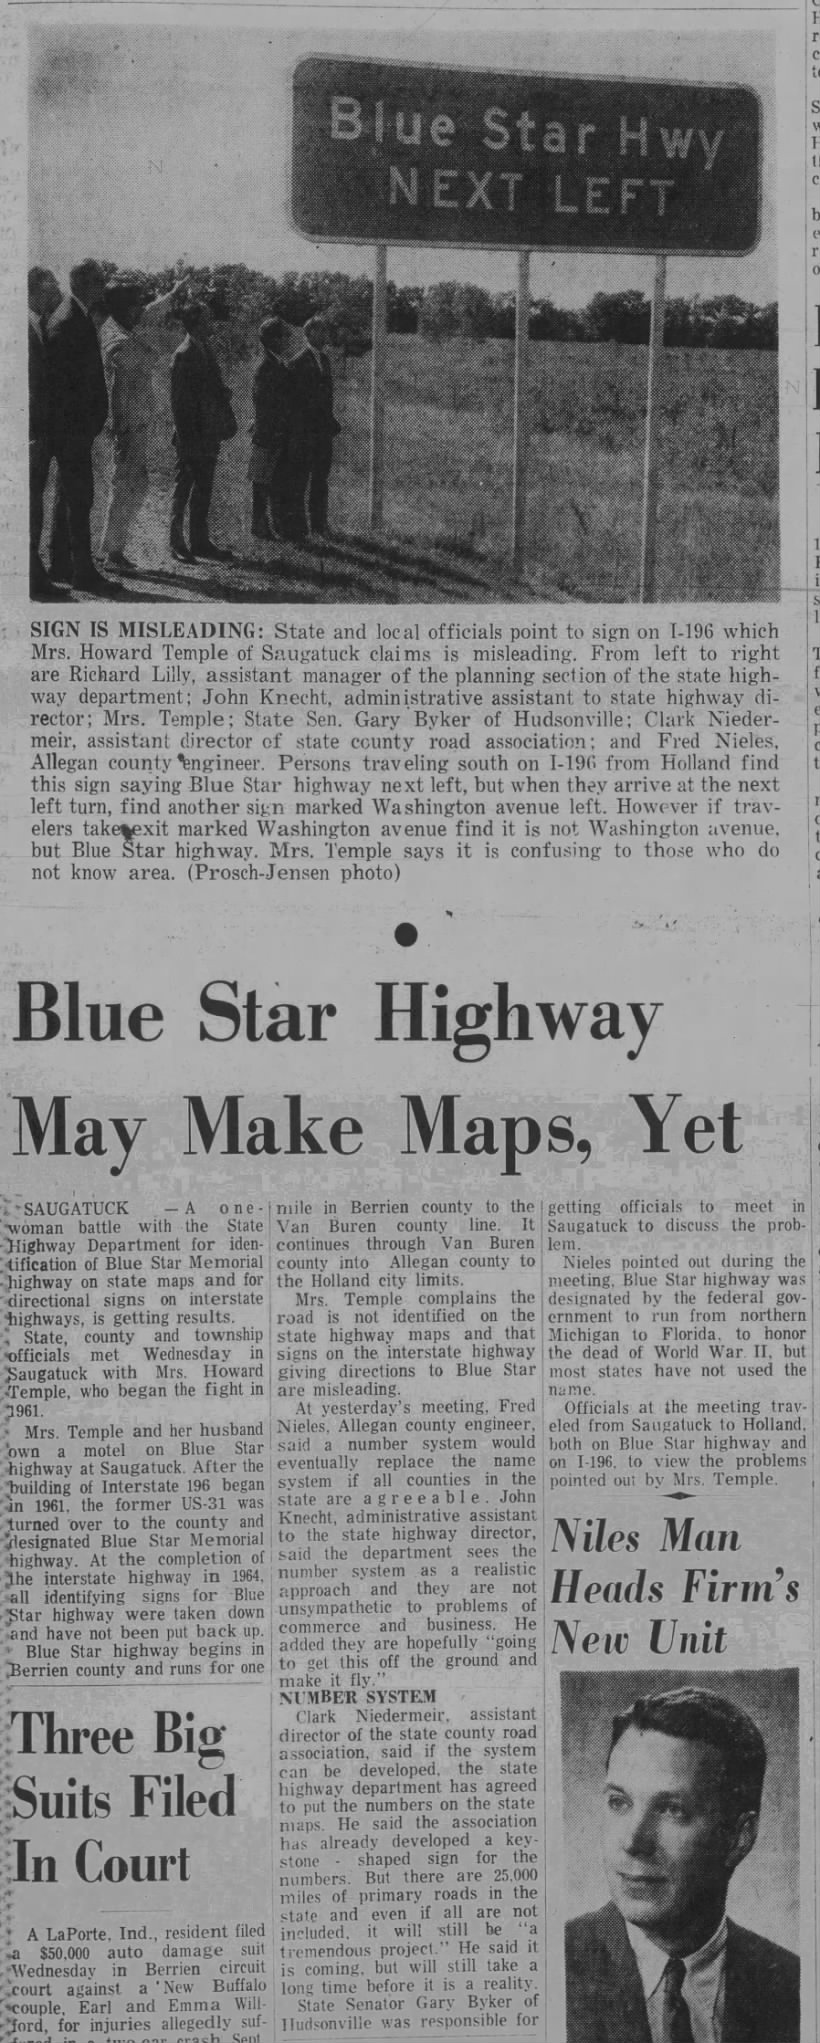 Blue Star Highway May Make Maps, Yet